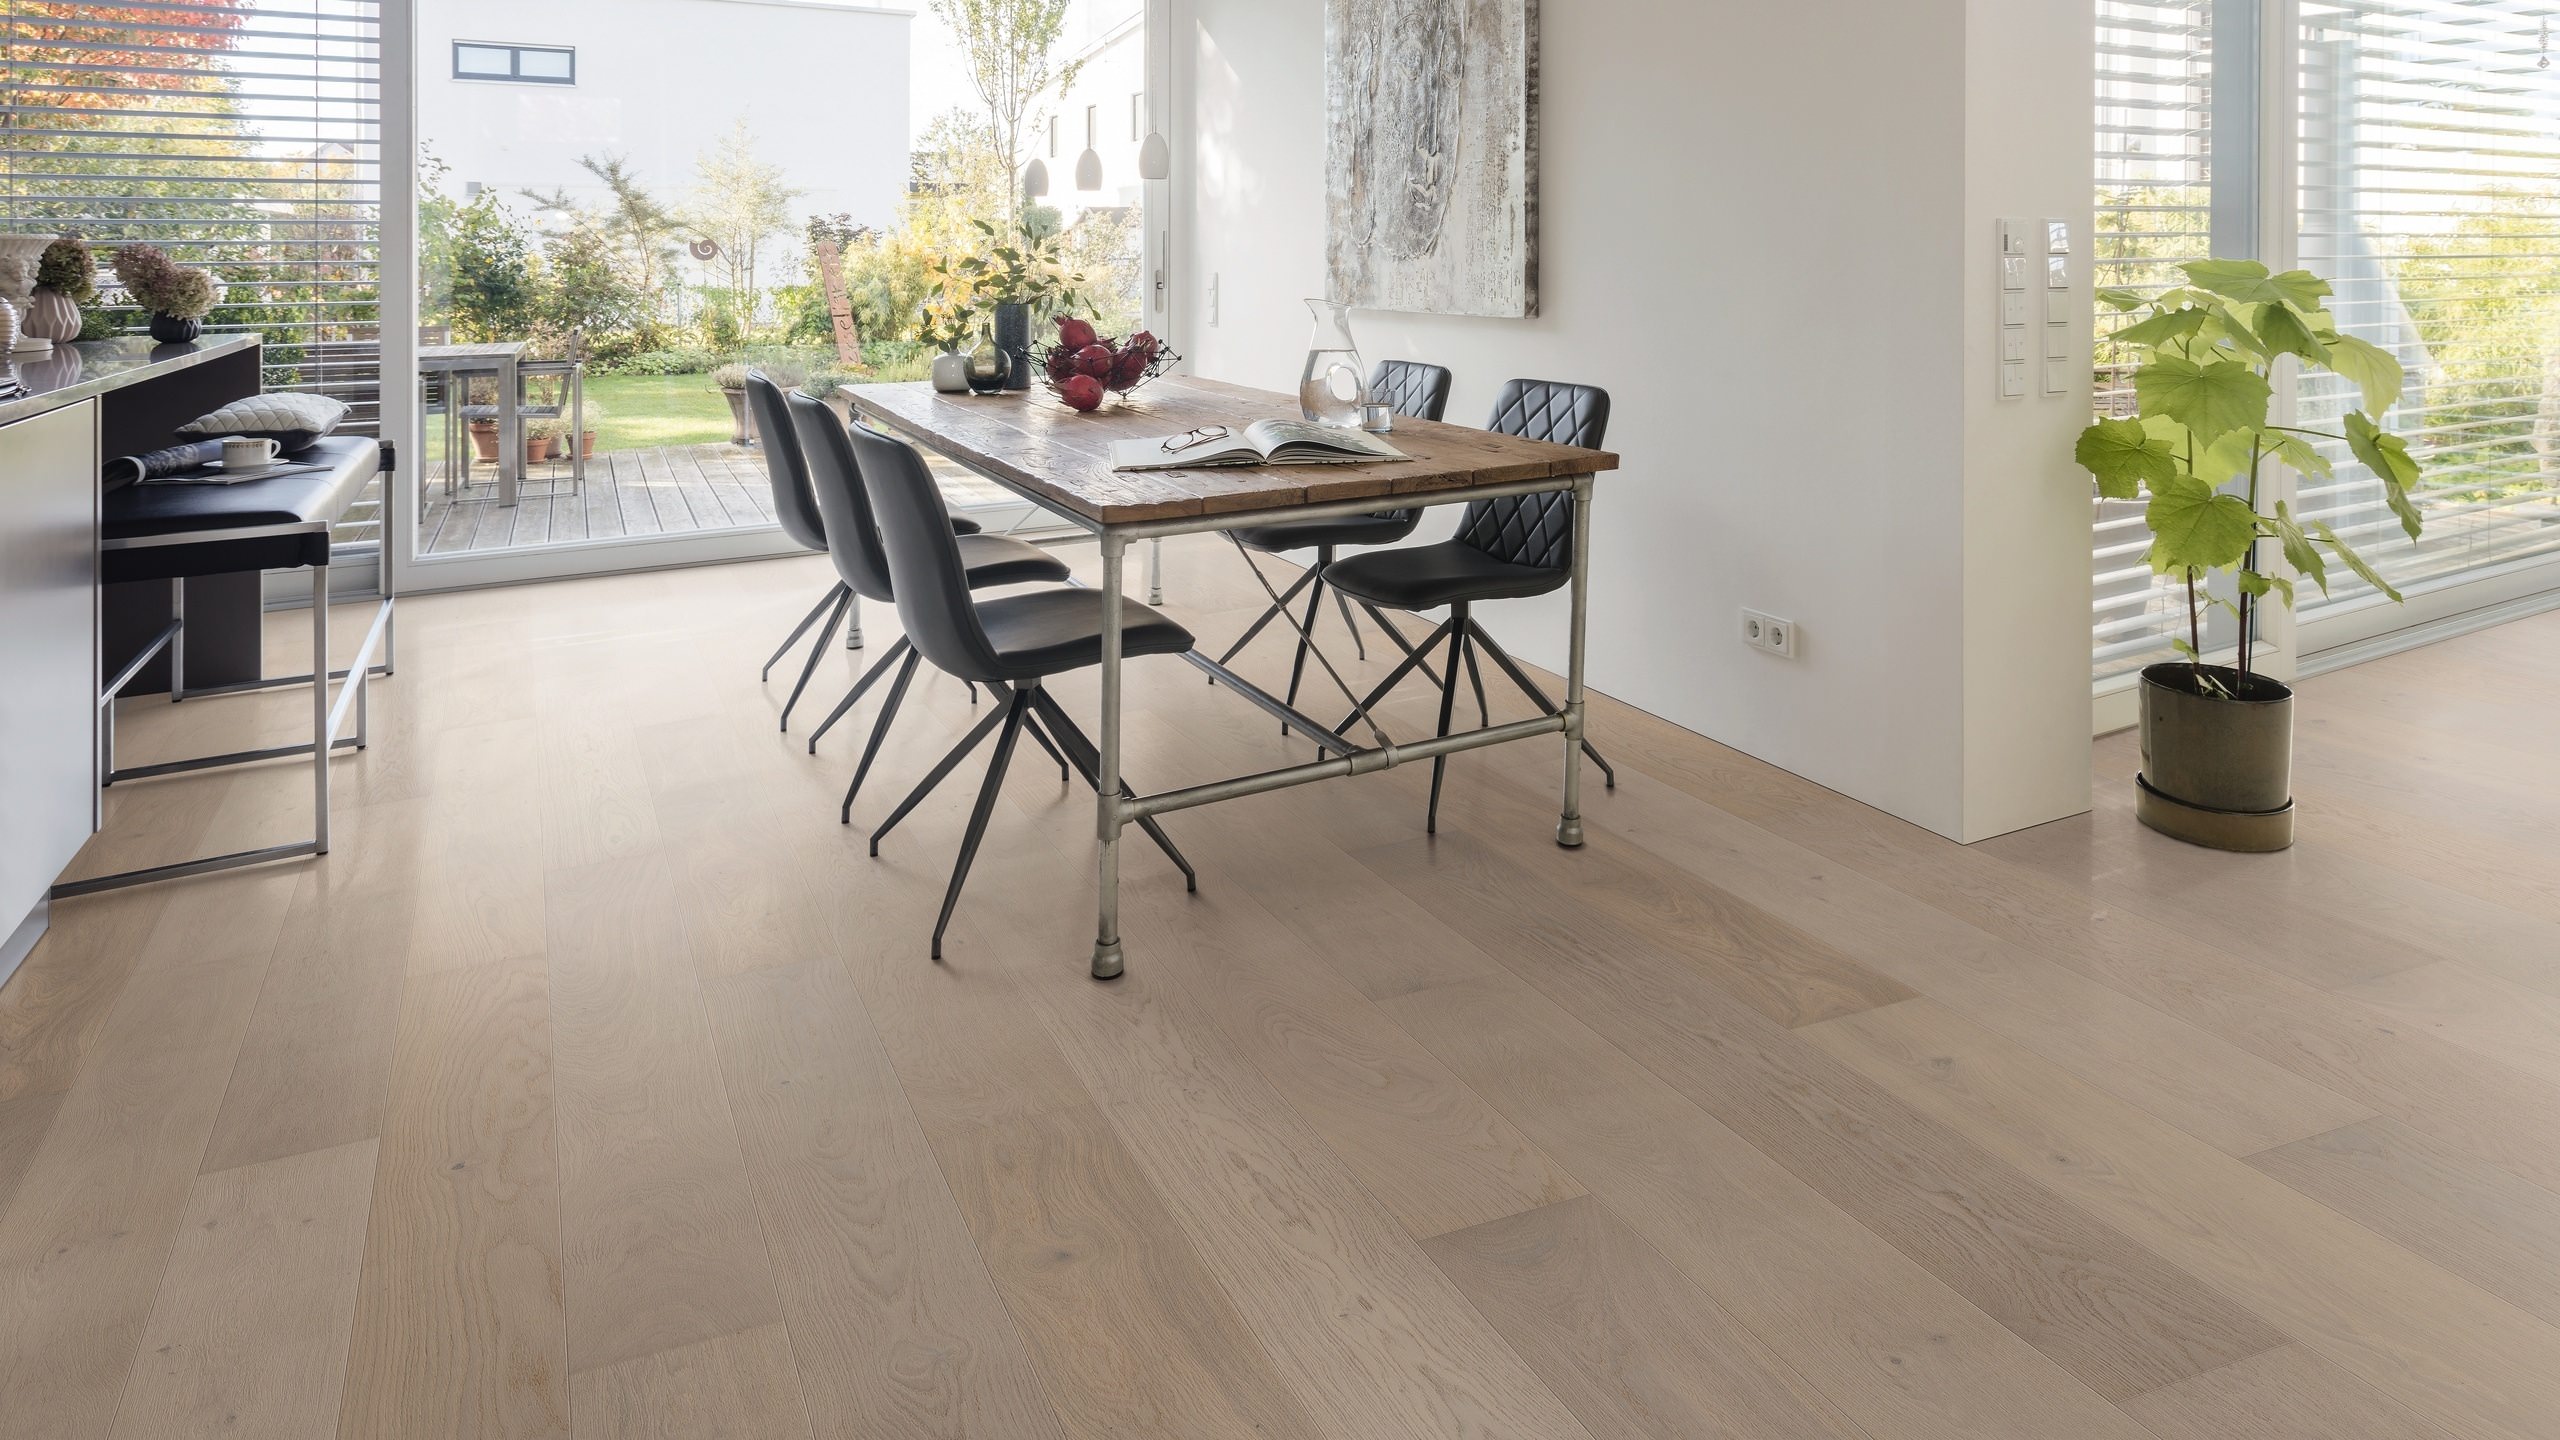 HARO PARQUET 4000 Plank 1-Strip 180 4V Oak Crystal White Markant brushed naturaLin plus Top Connect